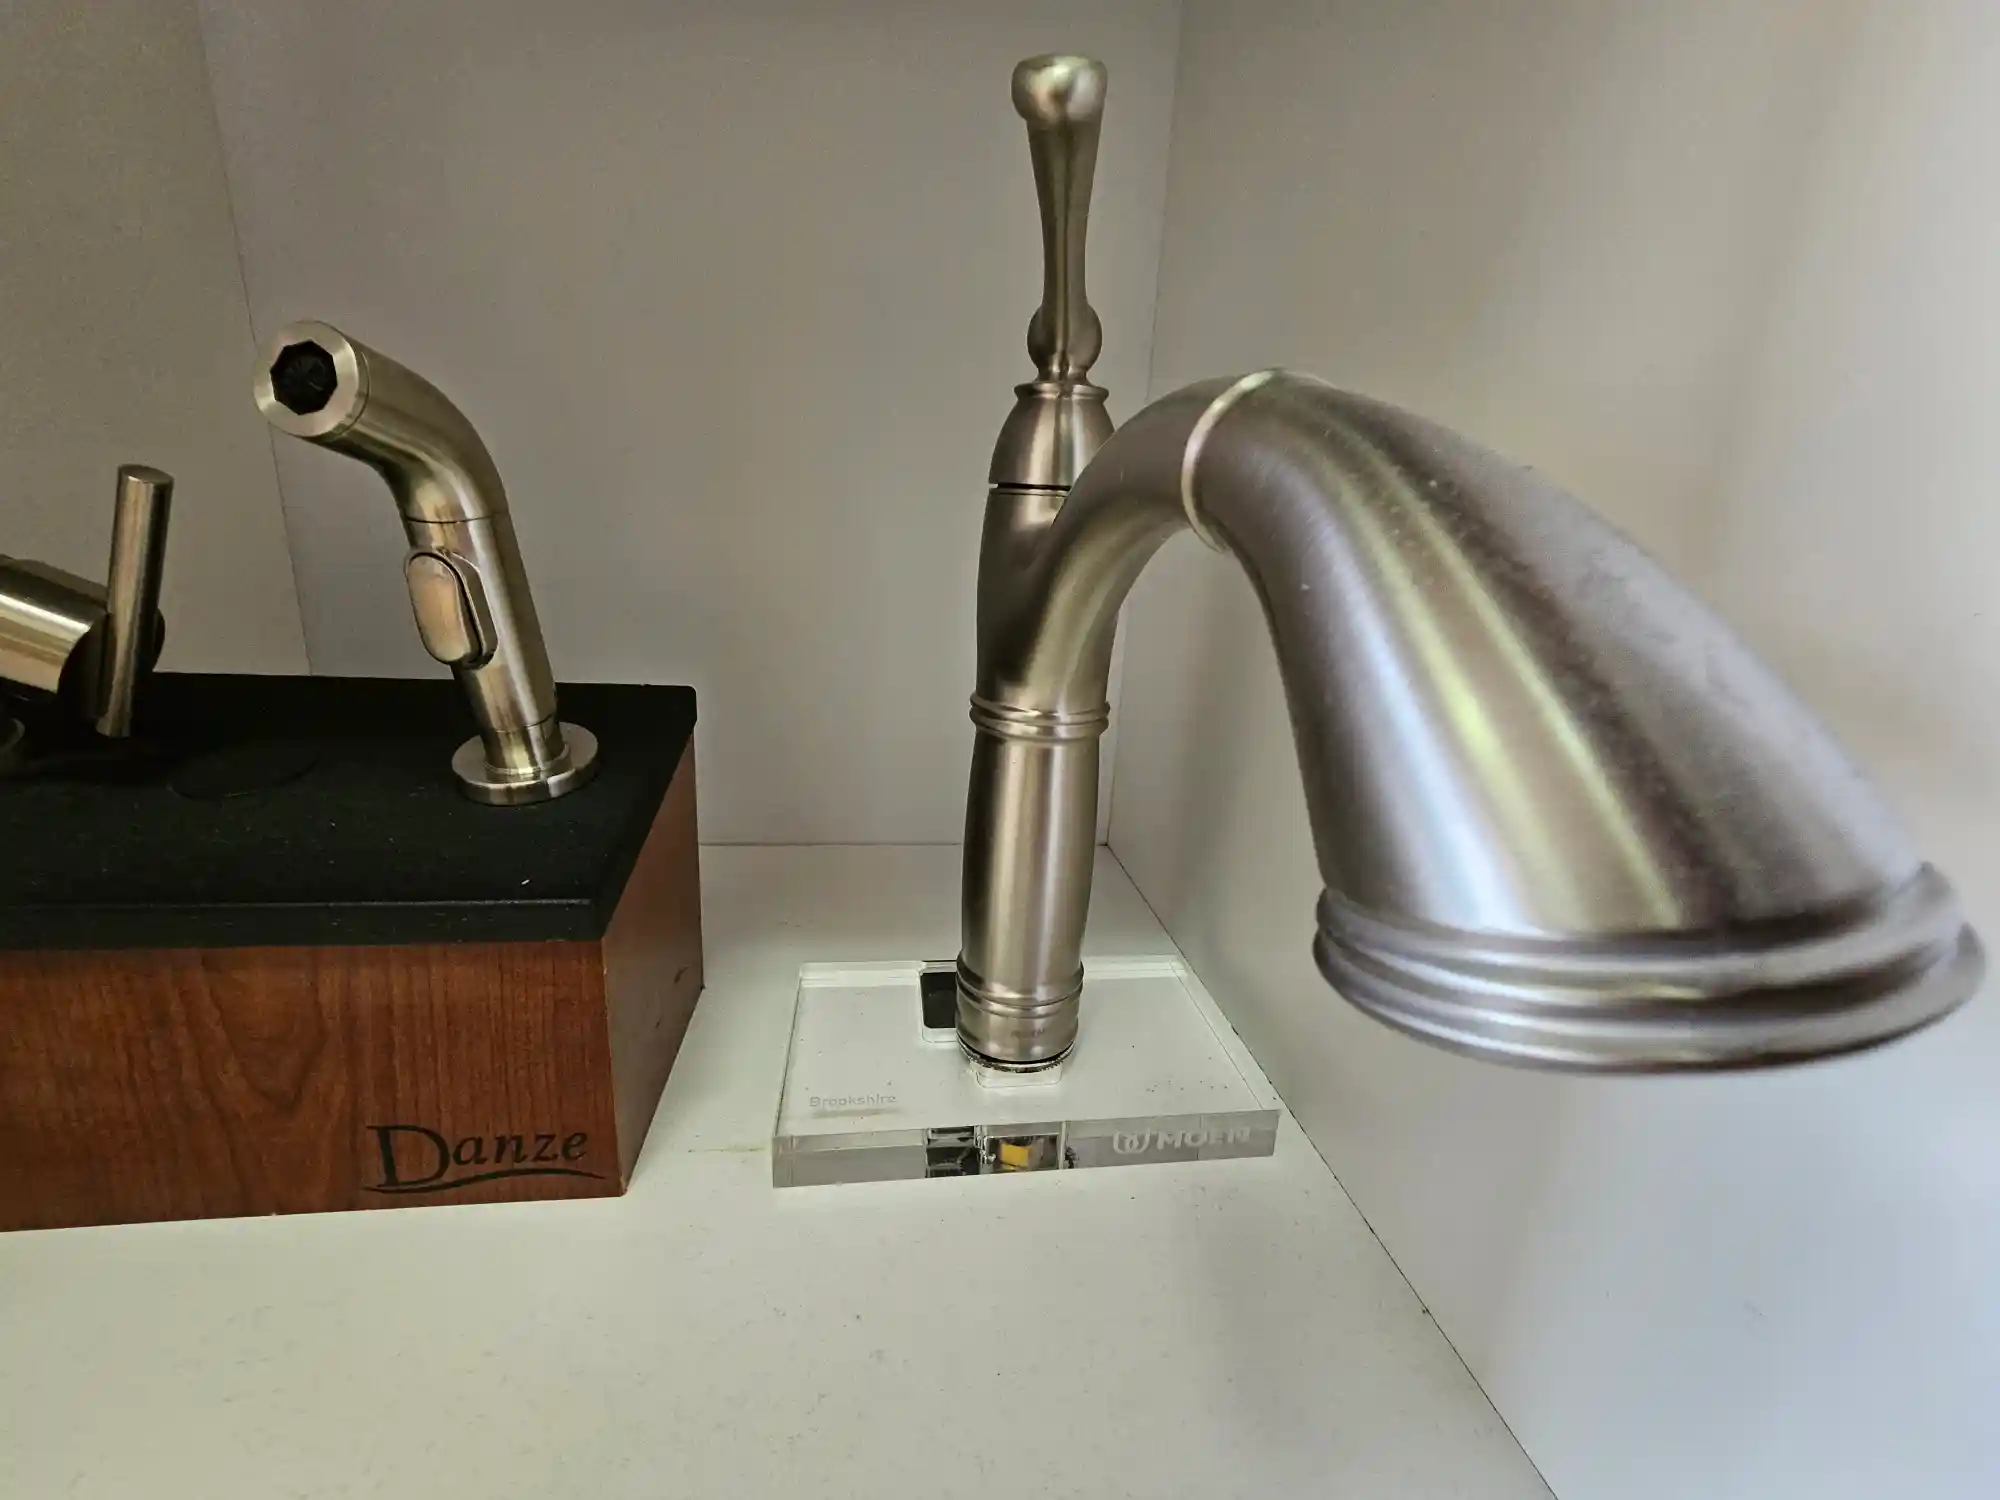 Silver faucet for kitchens and bathrooms.